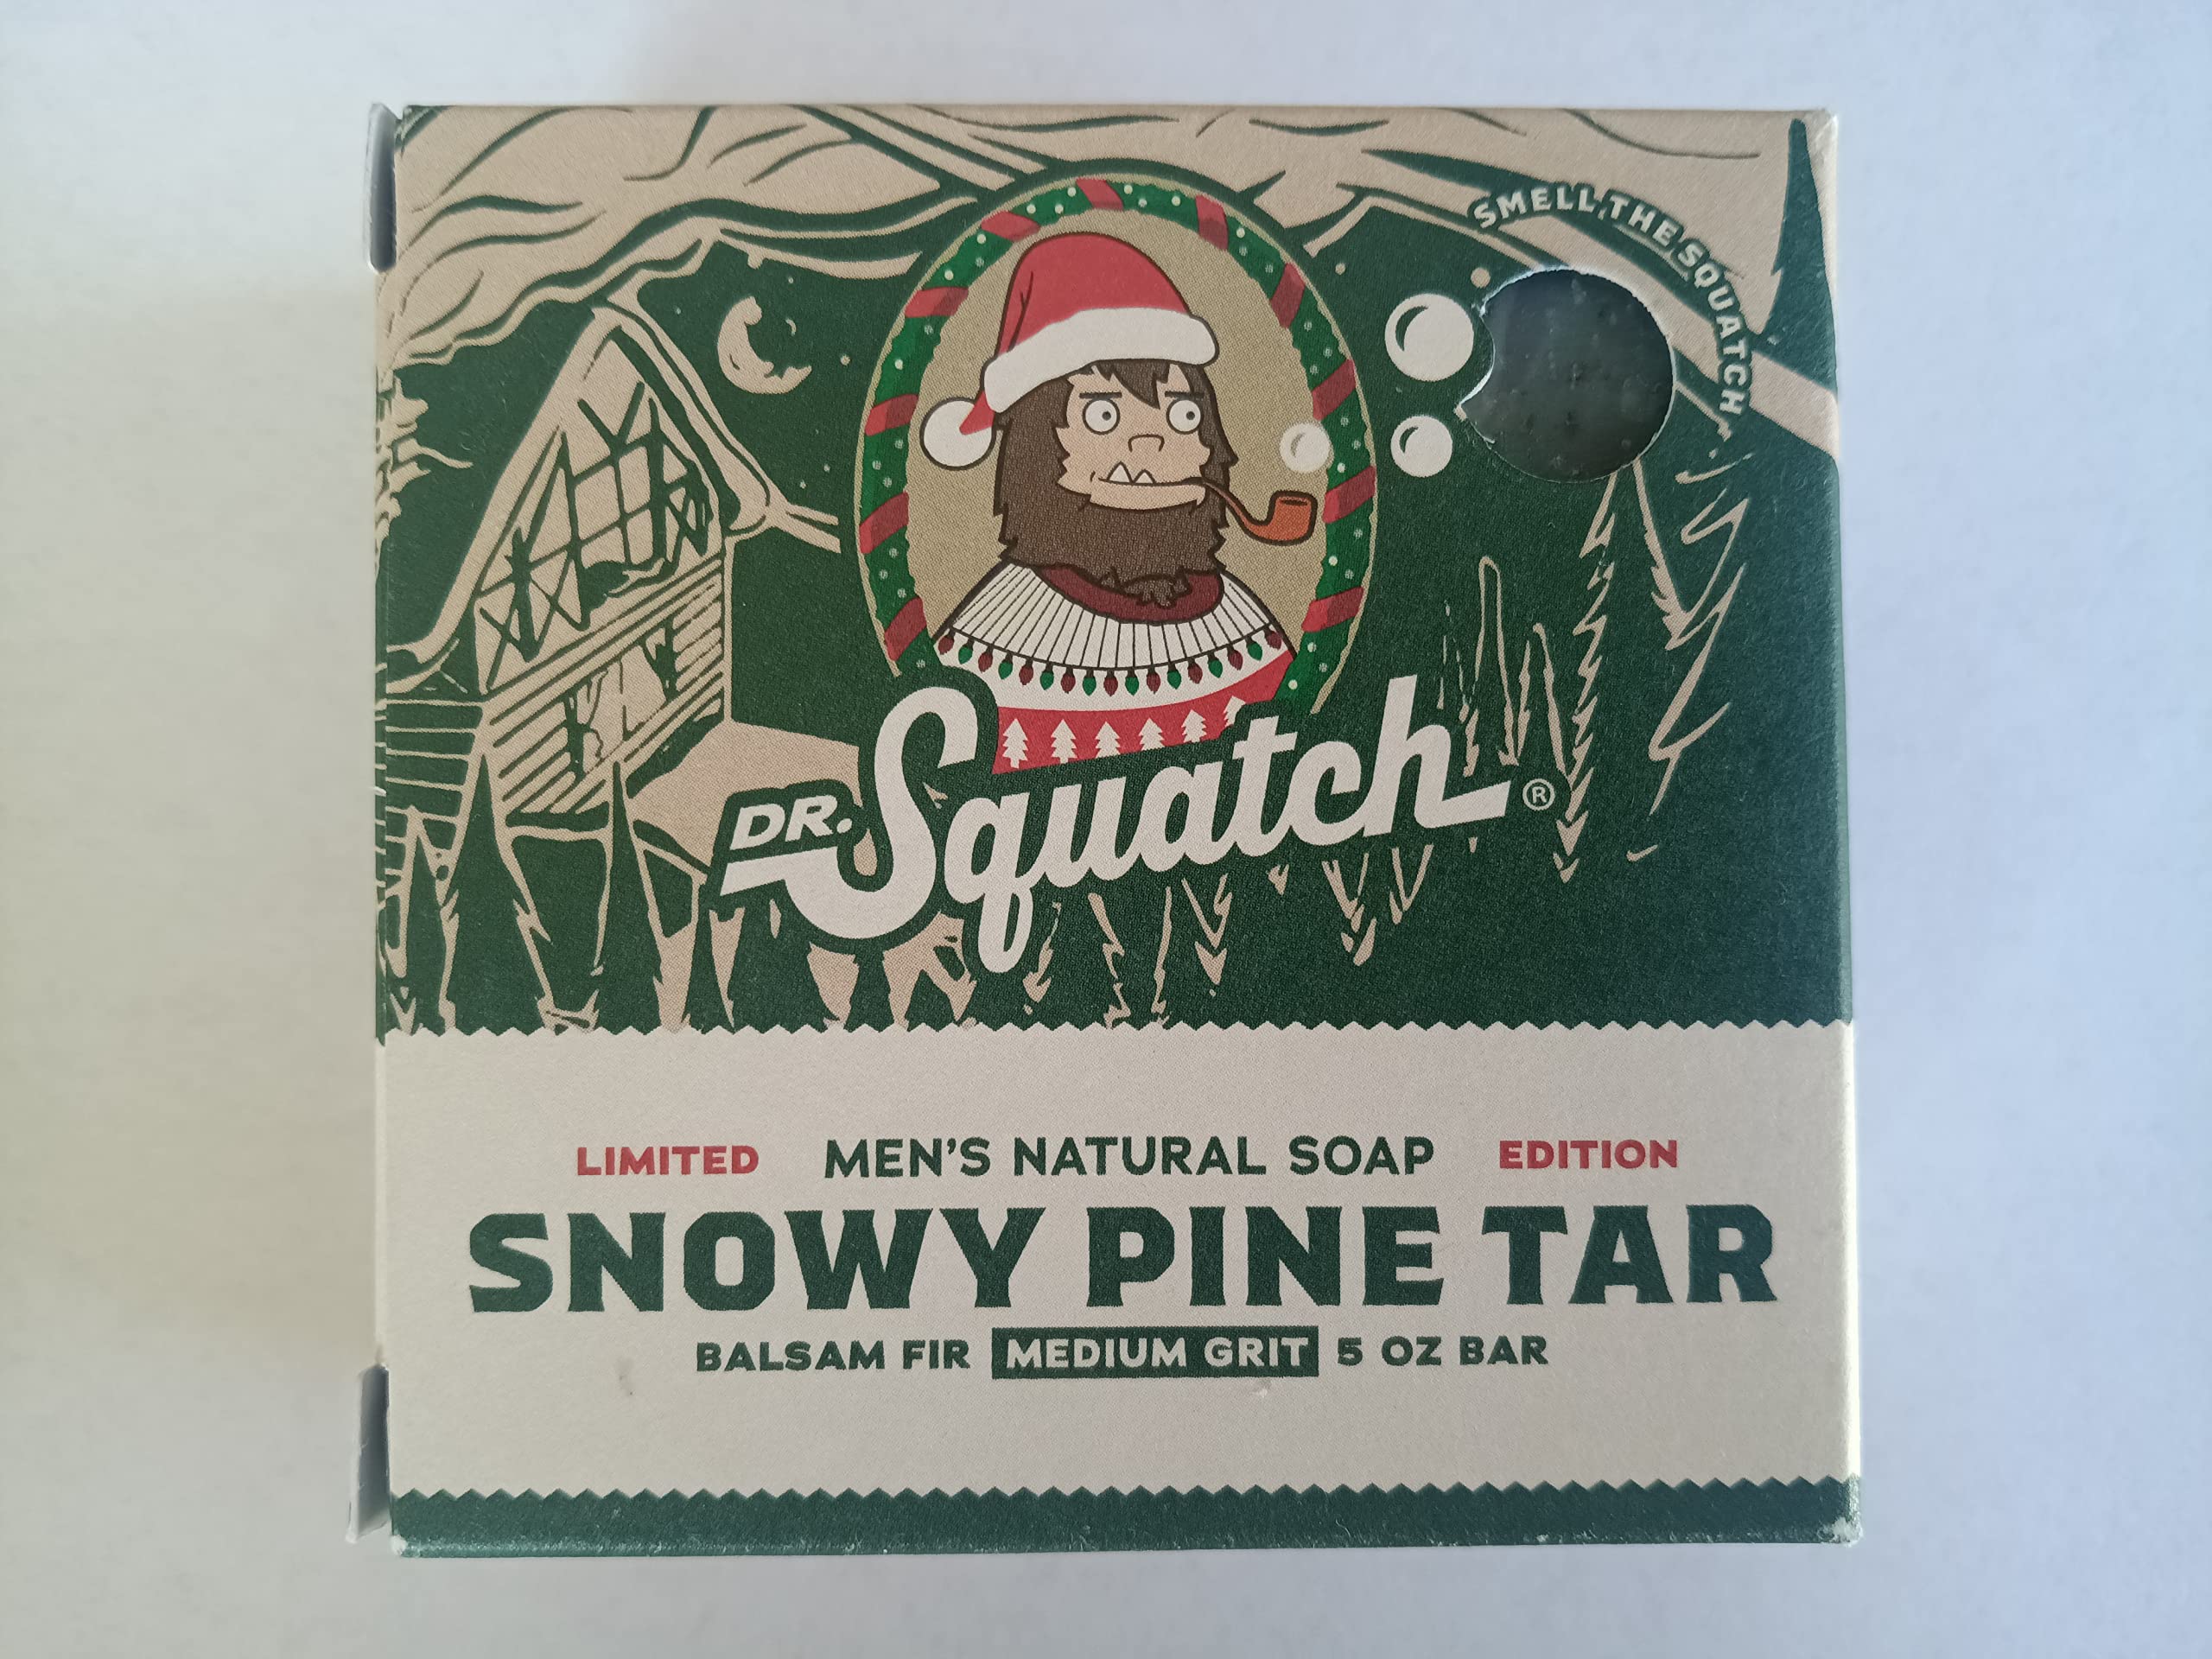  Dr. Squatch Limited Edition All Natural Bar Soap for Men with  Medium Grit, Spidey Suds : Beauty & Personal Care